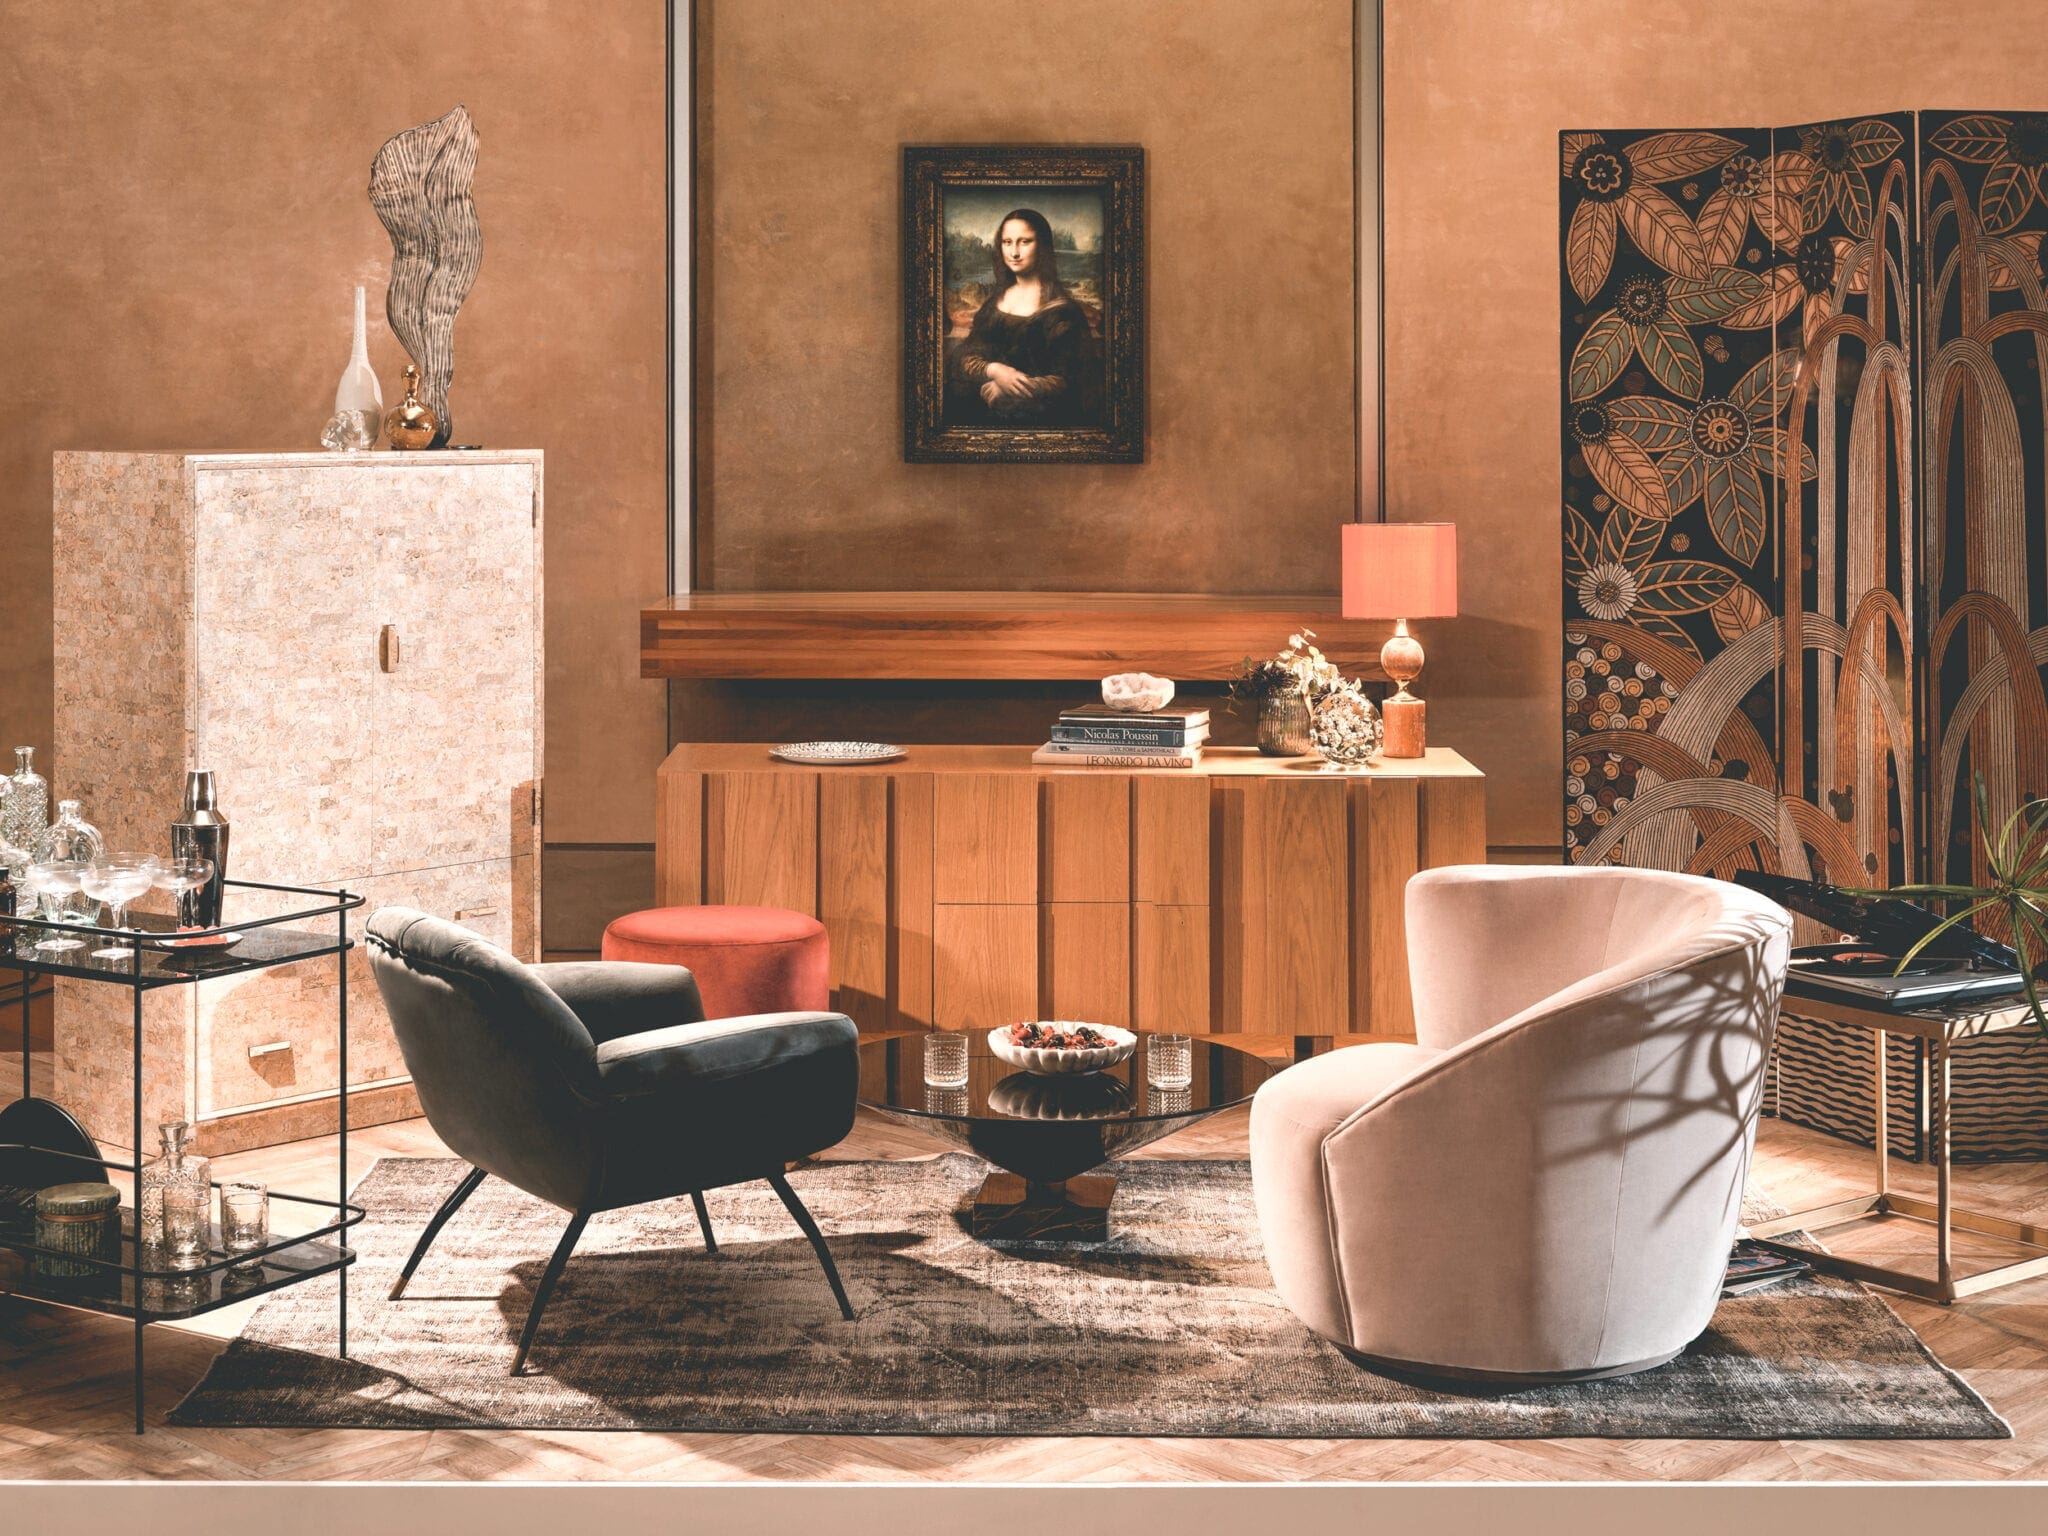 Tofste Airbnb's 2019 Louvre